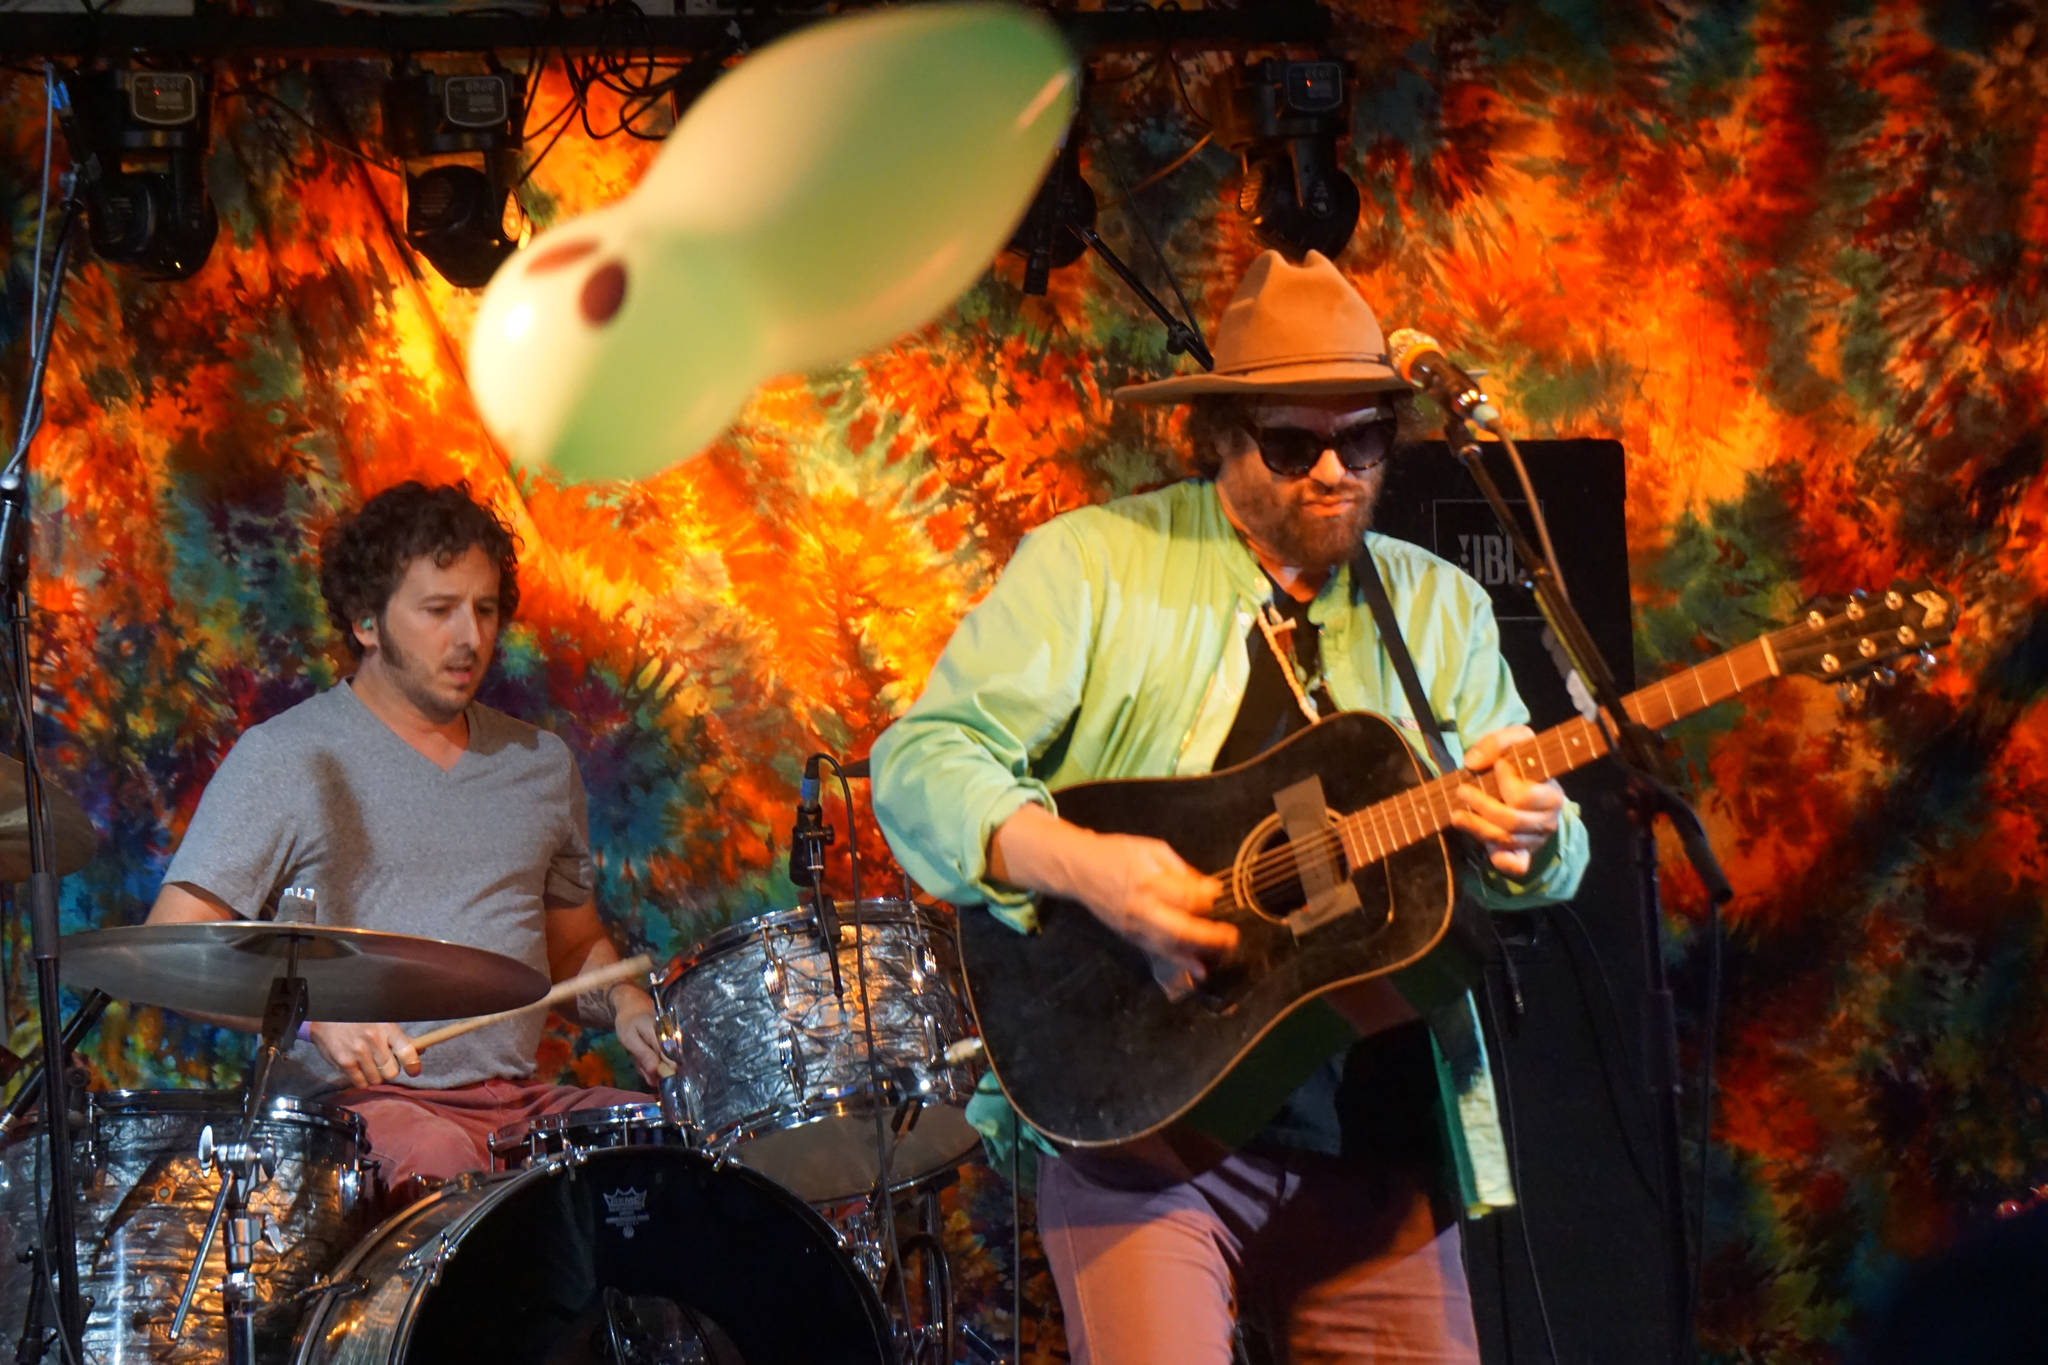 Zil Fessler, left, and Michael Glabicki of Rusted Root perform on Saturday night, Aug. 5, 2017, at Salmonfest, Ninilchik, Alaska. A balloon bounces over the crowd. (Photo by Michael Armstrong, Homer News)